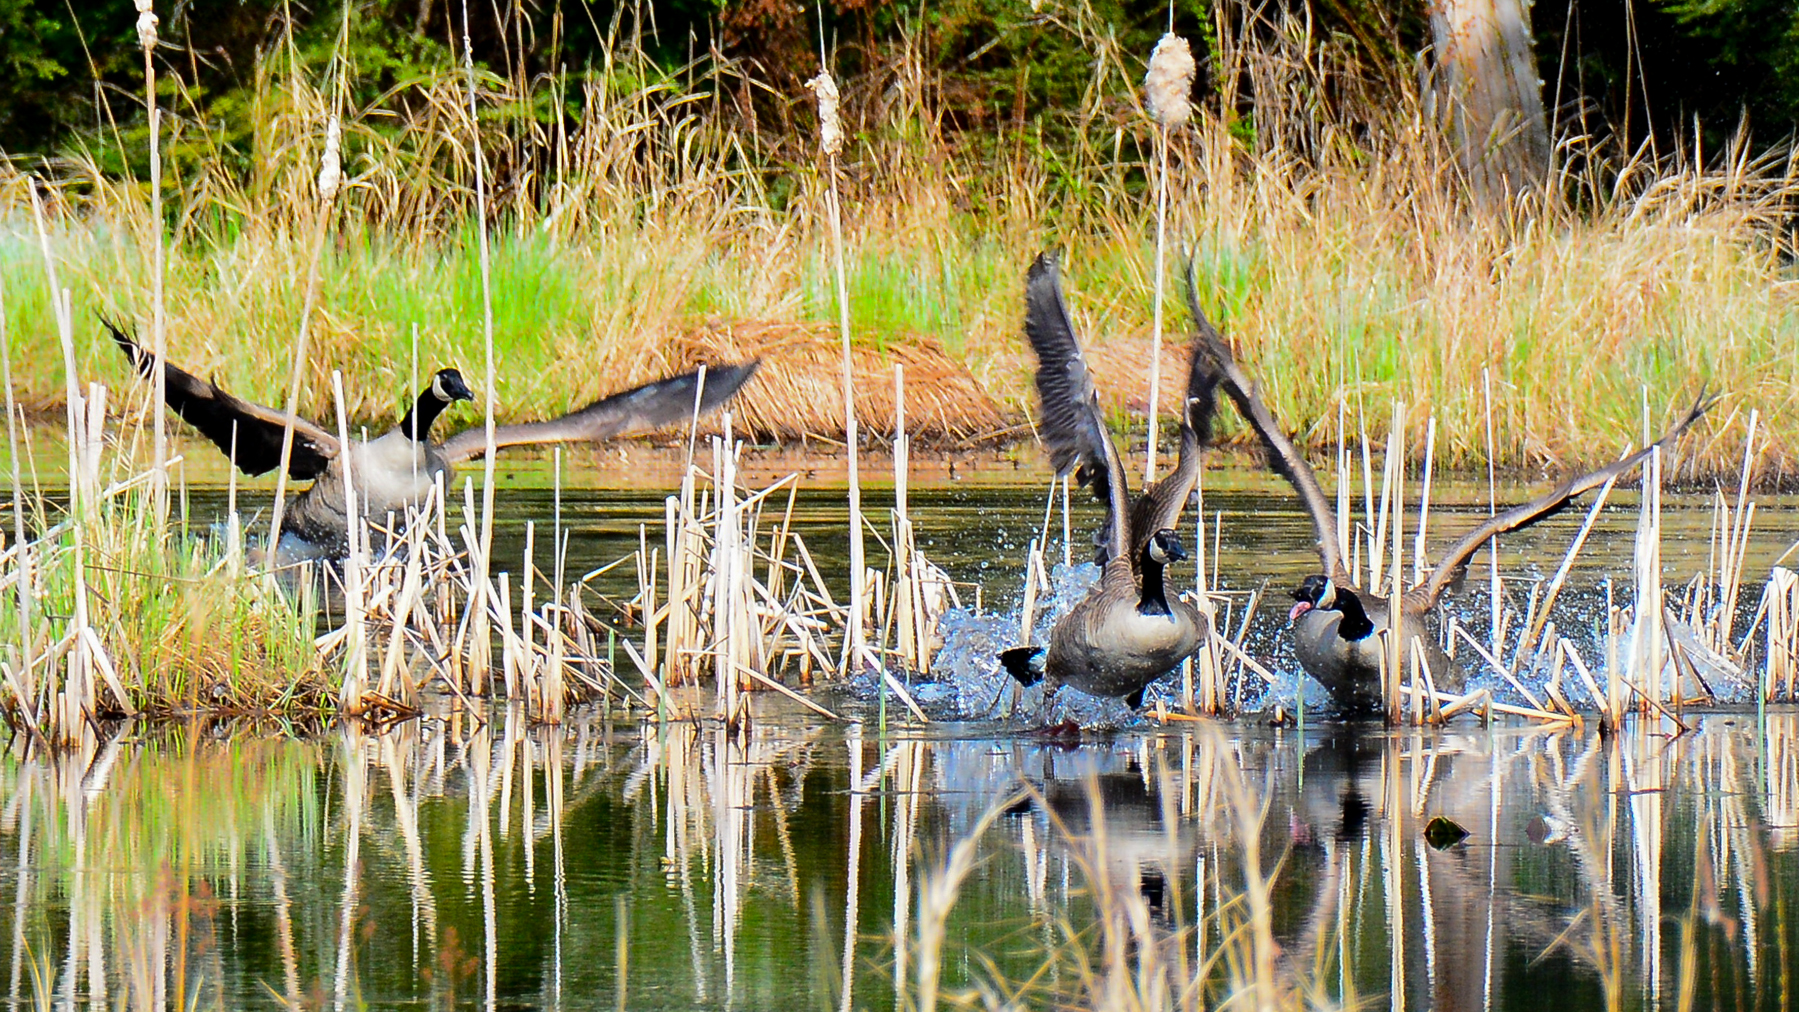   Canada geese do battle for territories in beaver ponds and sections of the main reservoir. The battles end with one pair being driven off.  